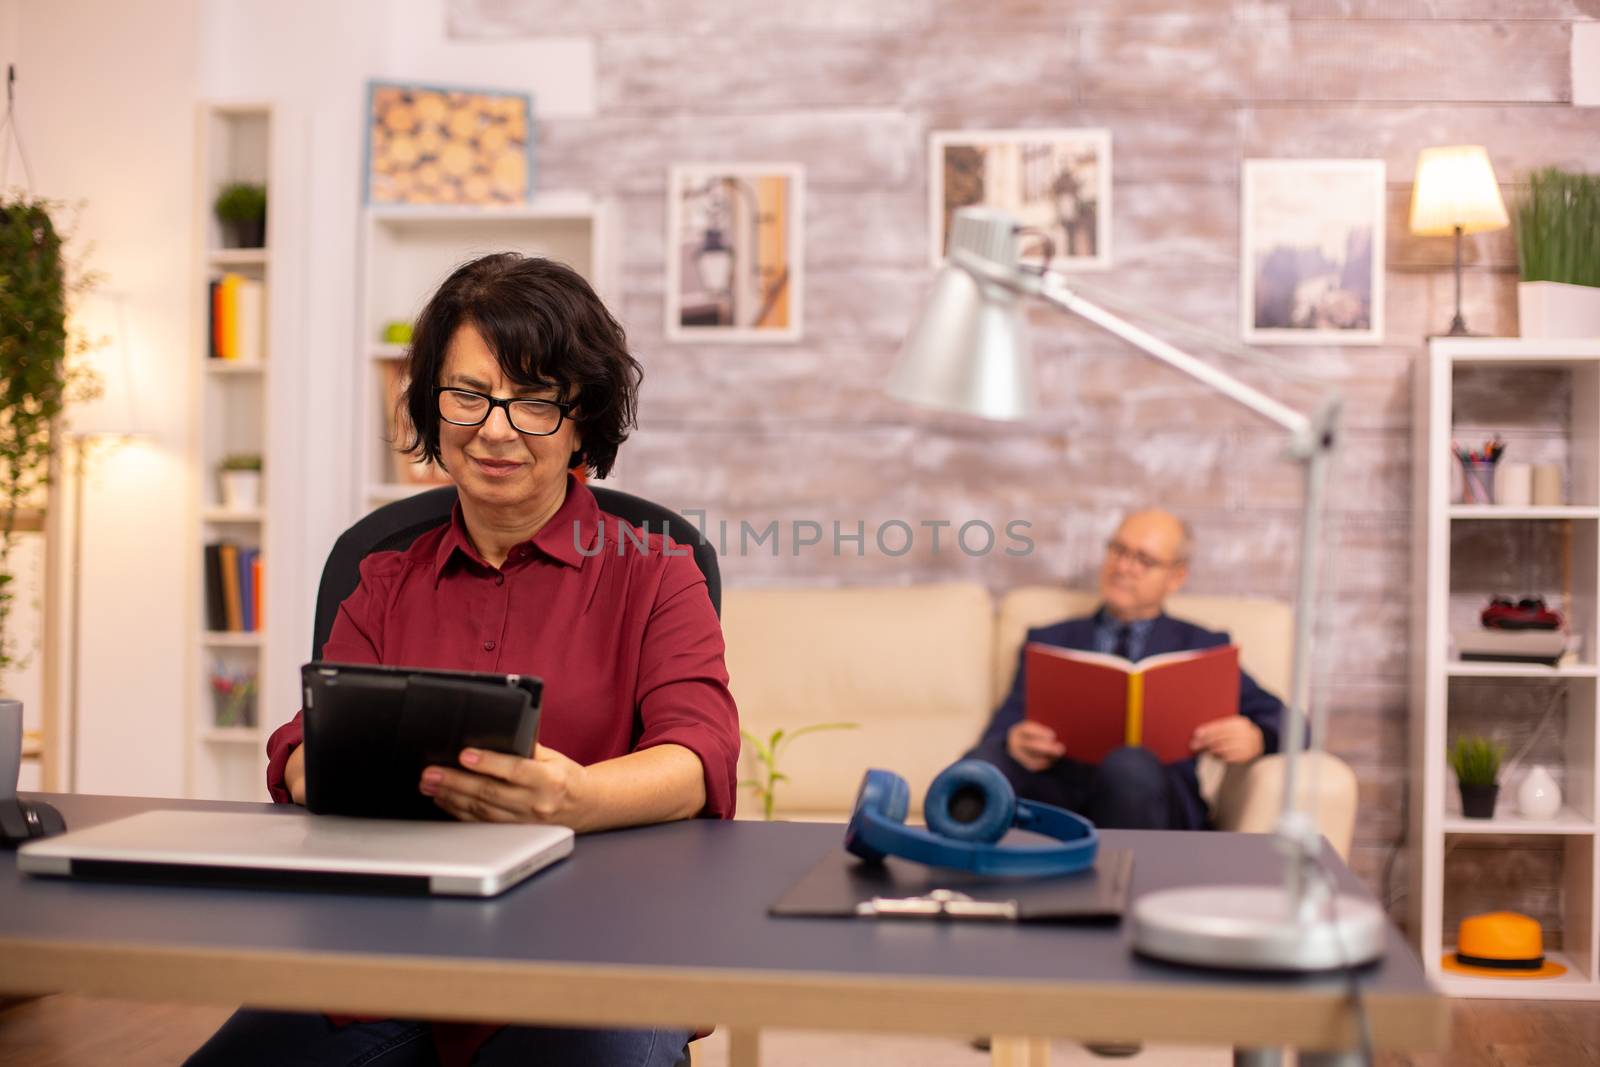 Old lady in her 60s using modern technolgy in cozy living space while her husband reads in the background